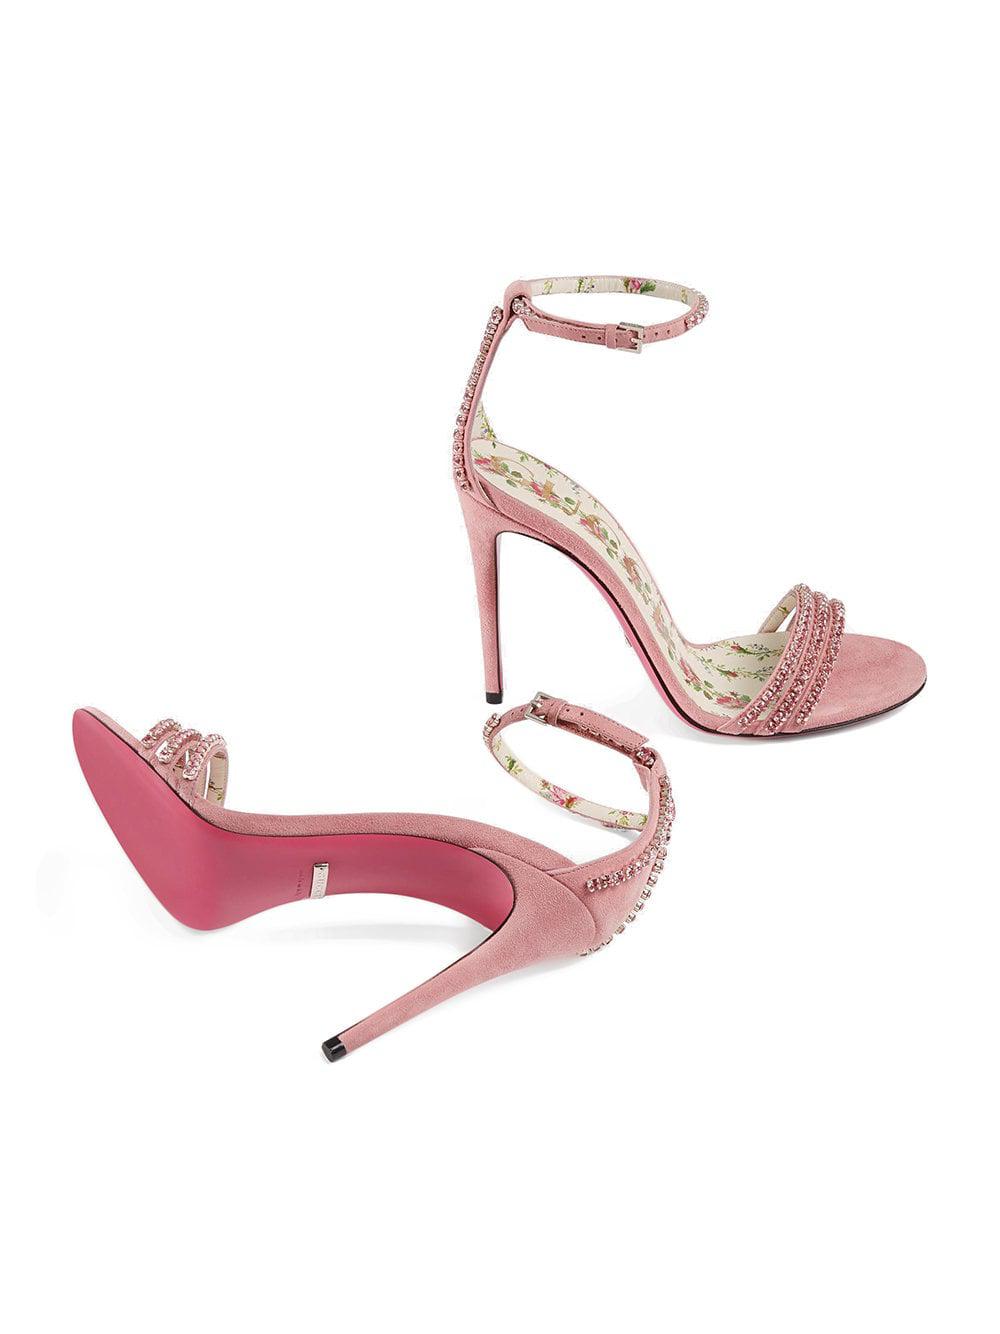 Gucci Crystal Embellished Sandals in Pink | Lyst